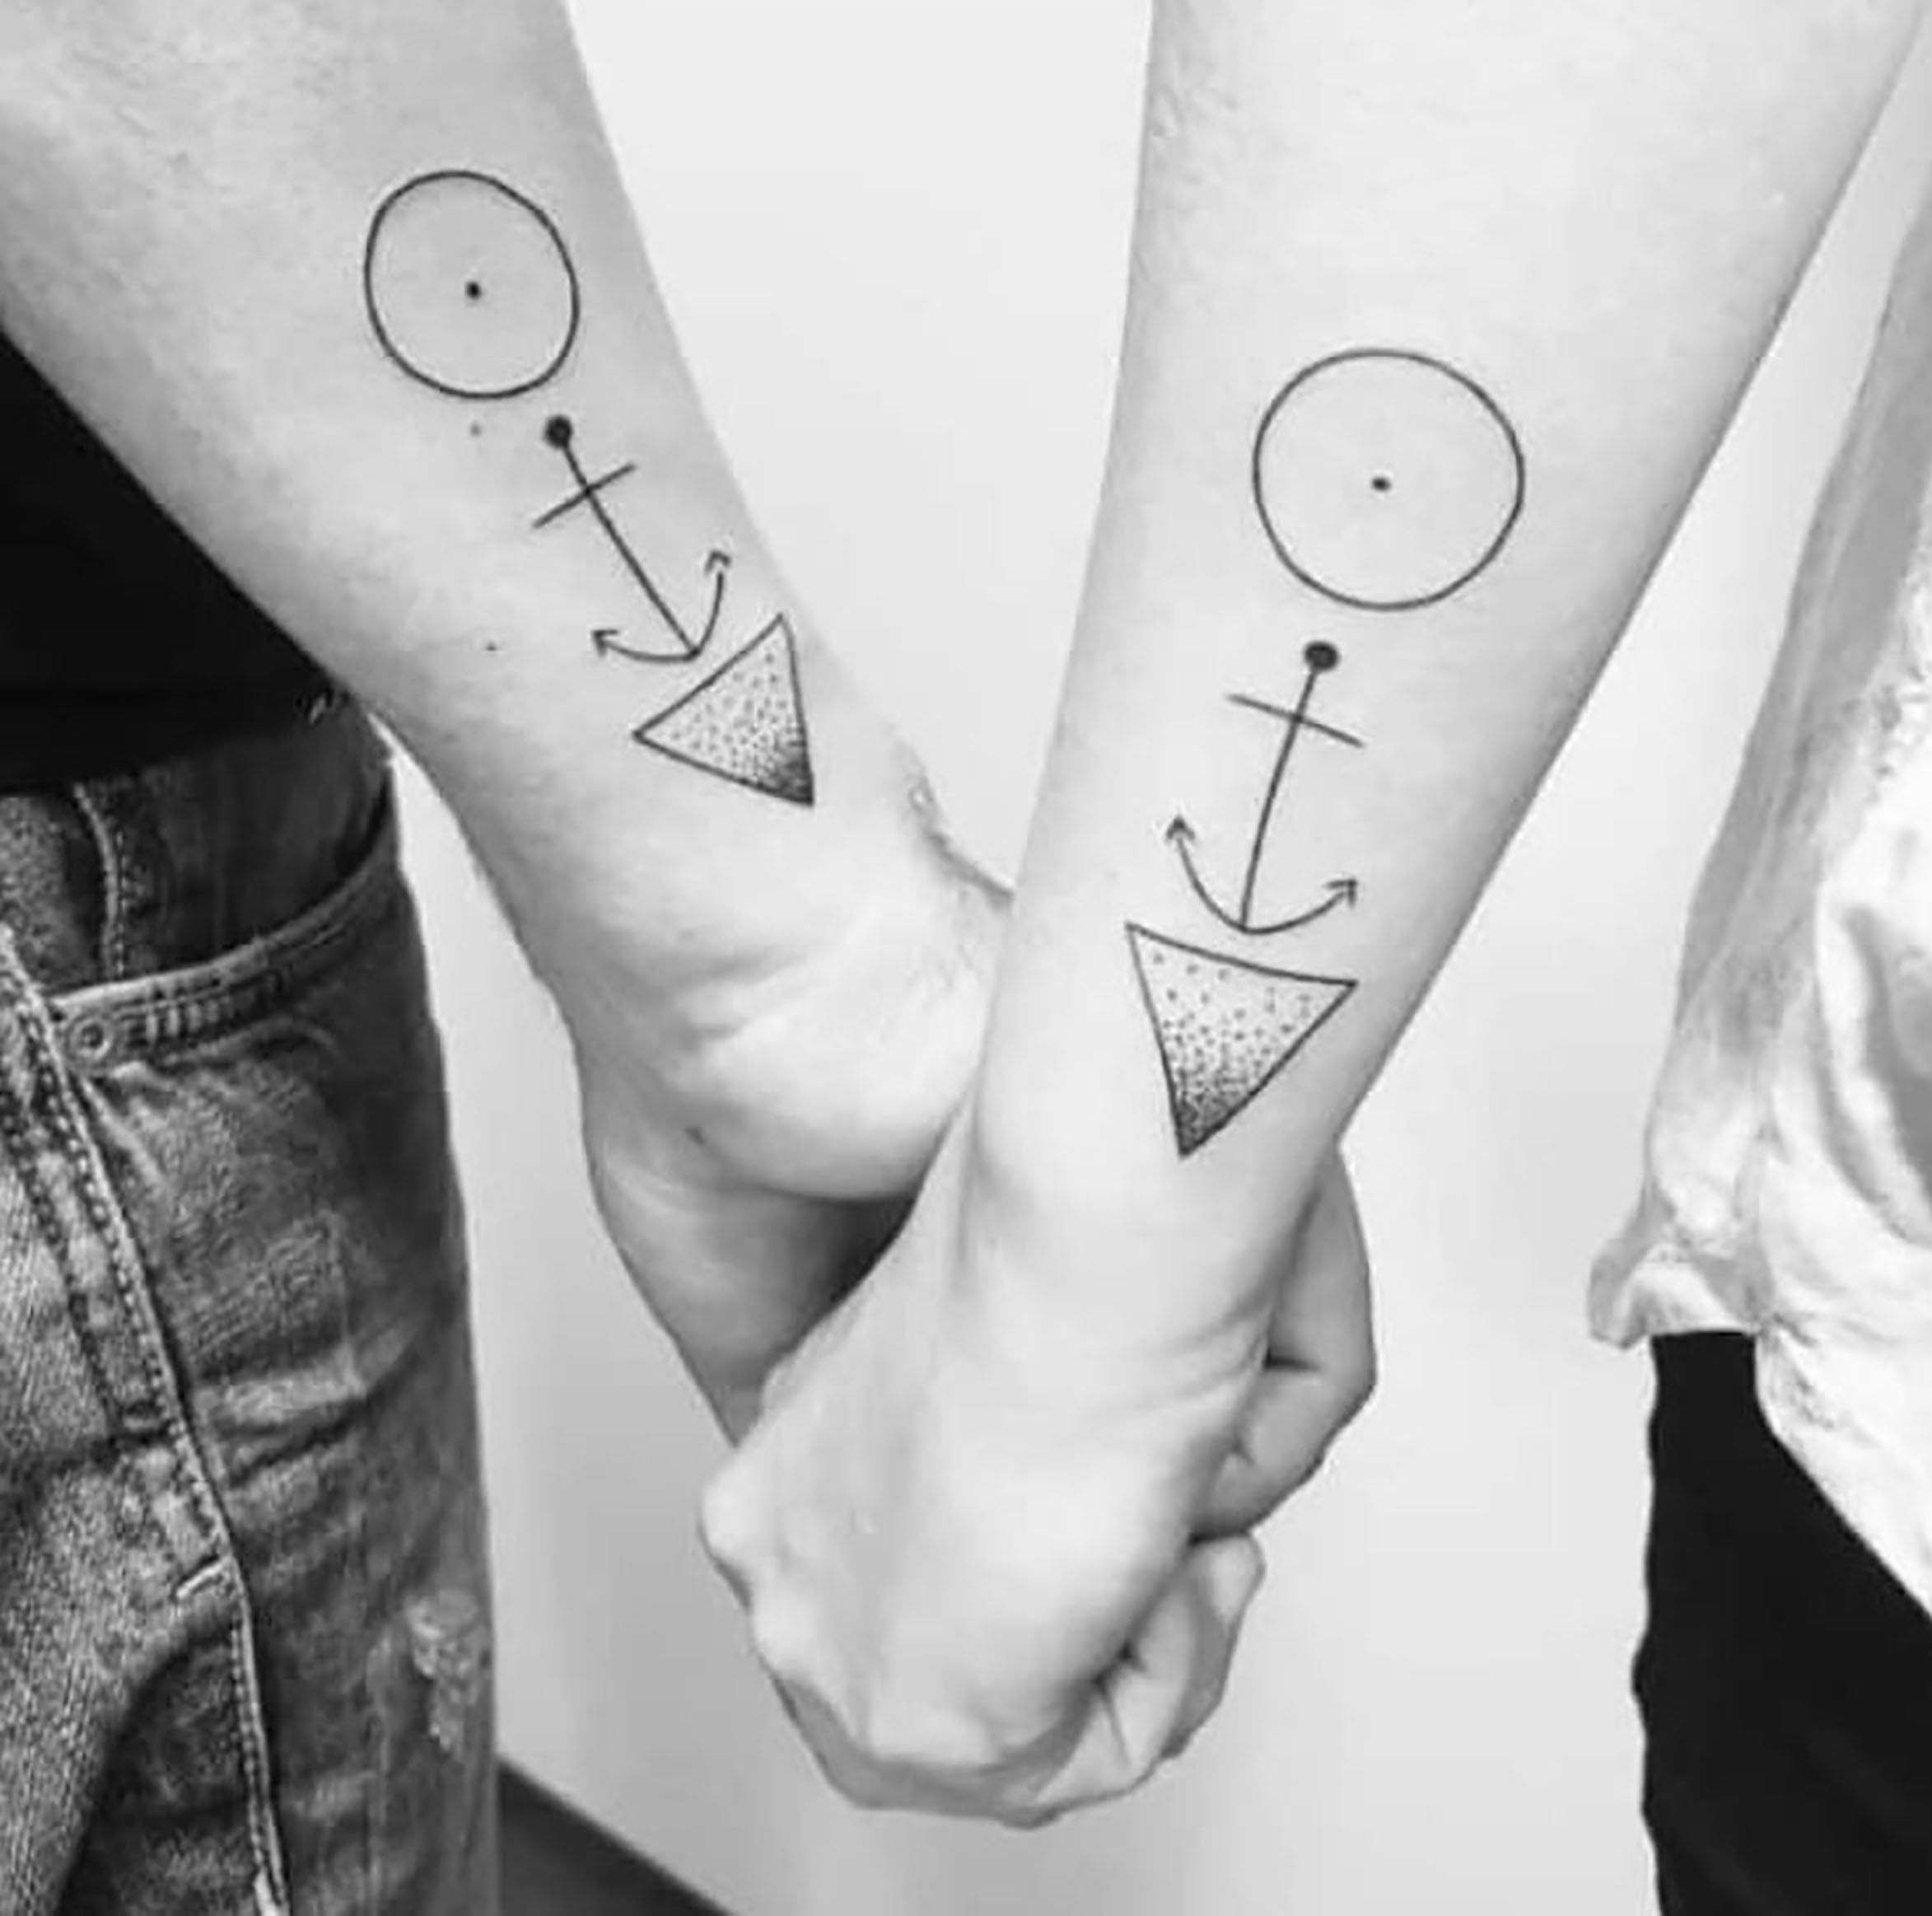 50 Matching Couple Tattoo Ideas To Try with Your Significant Other   Hairstylery